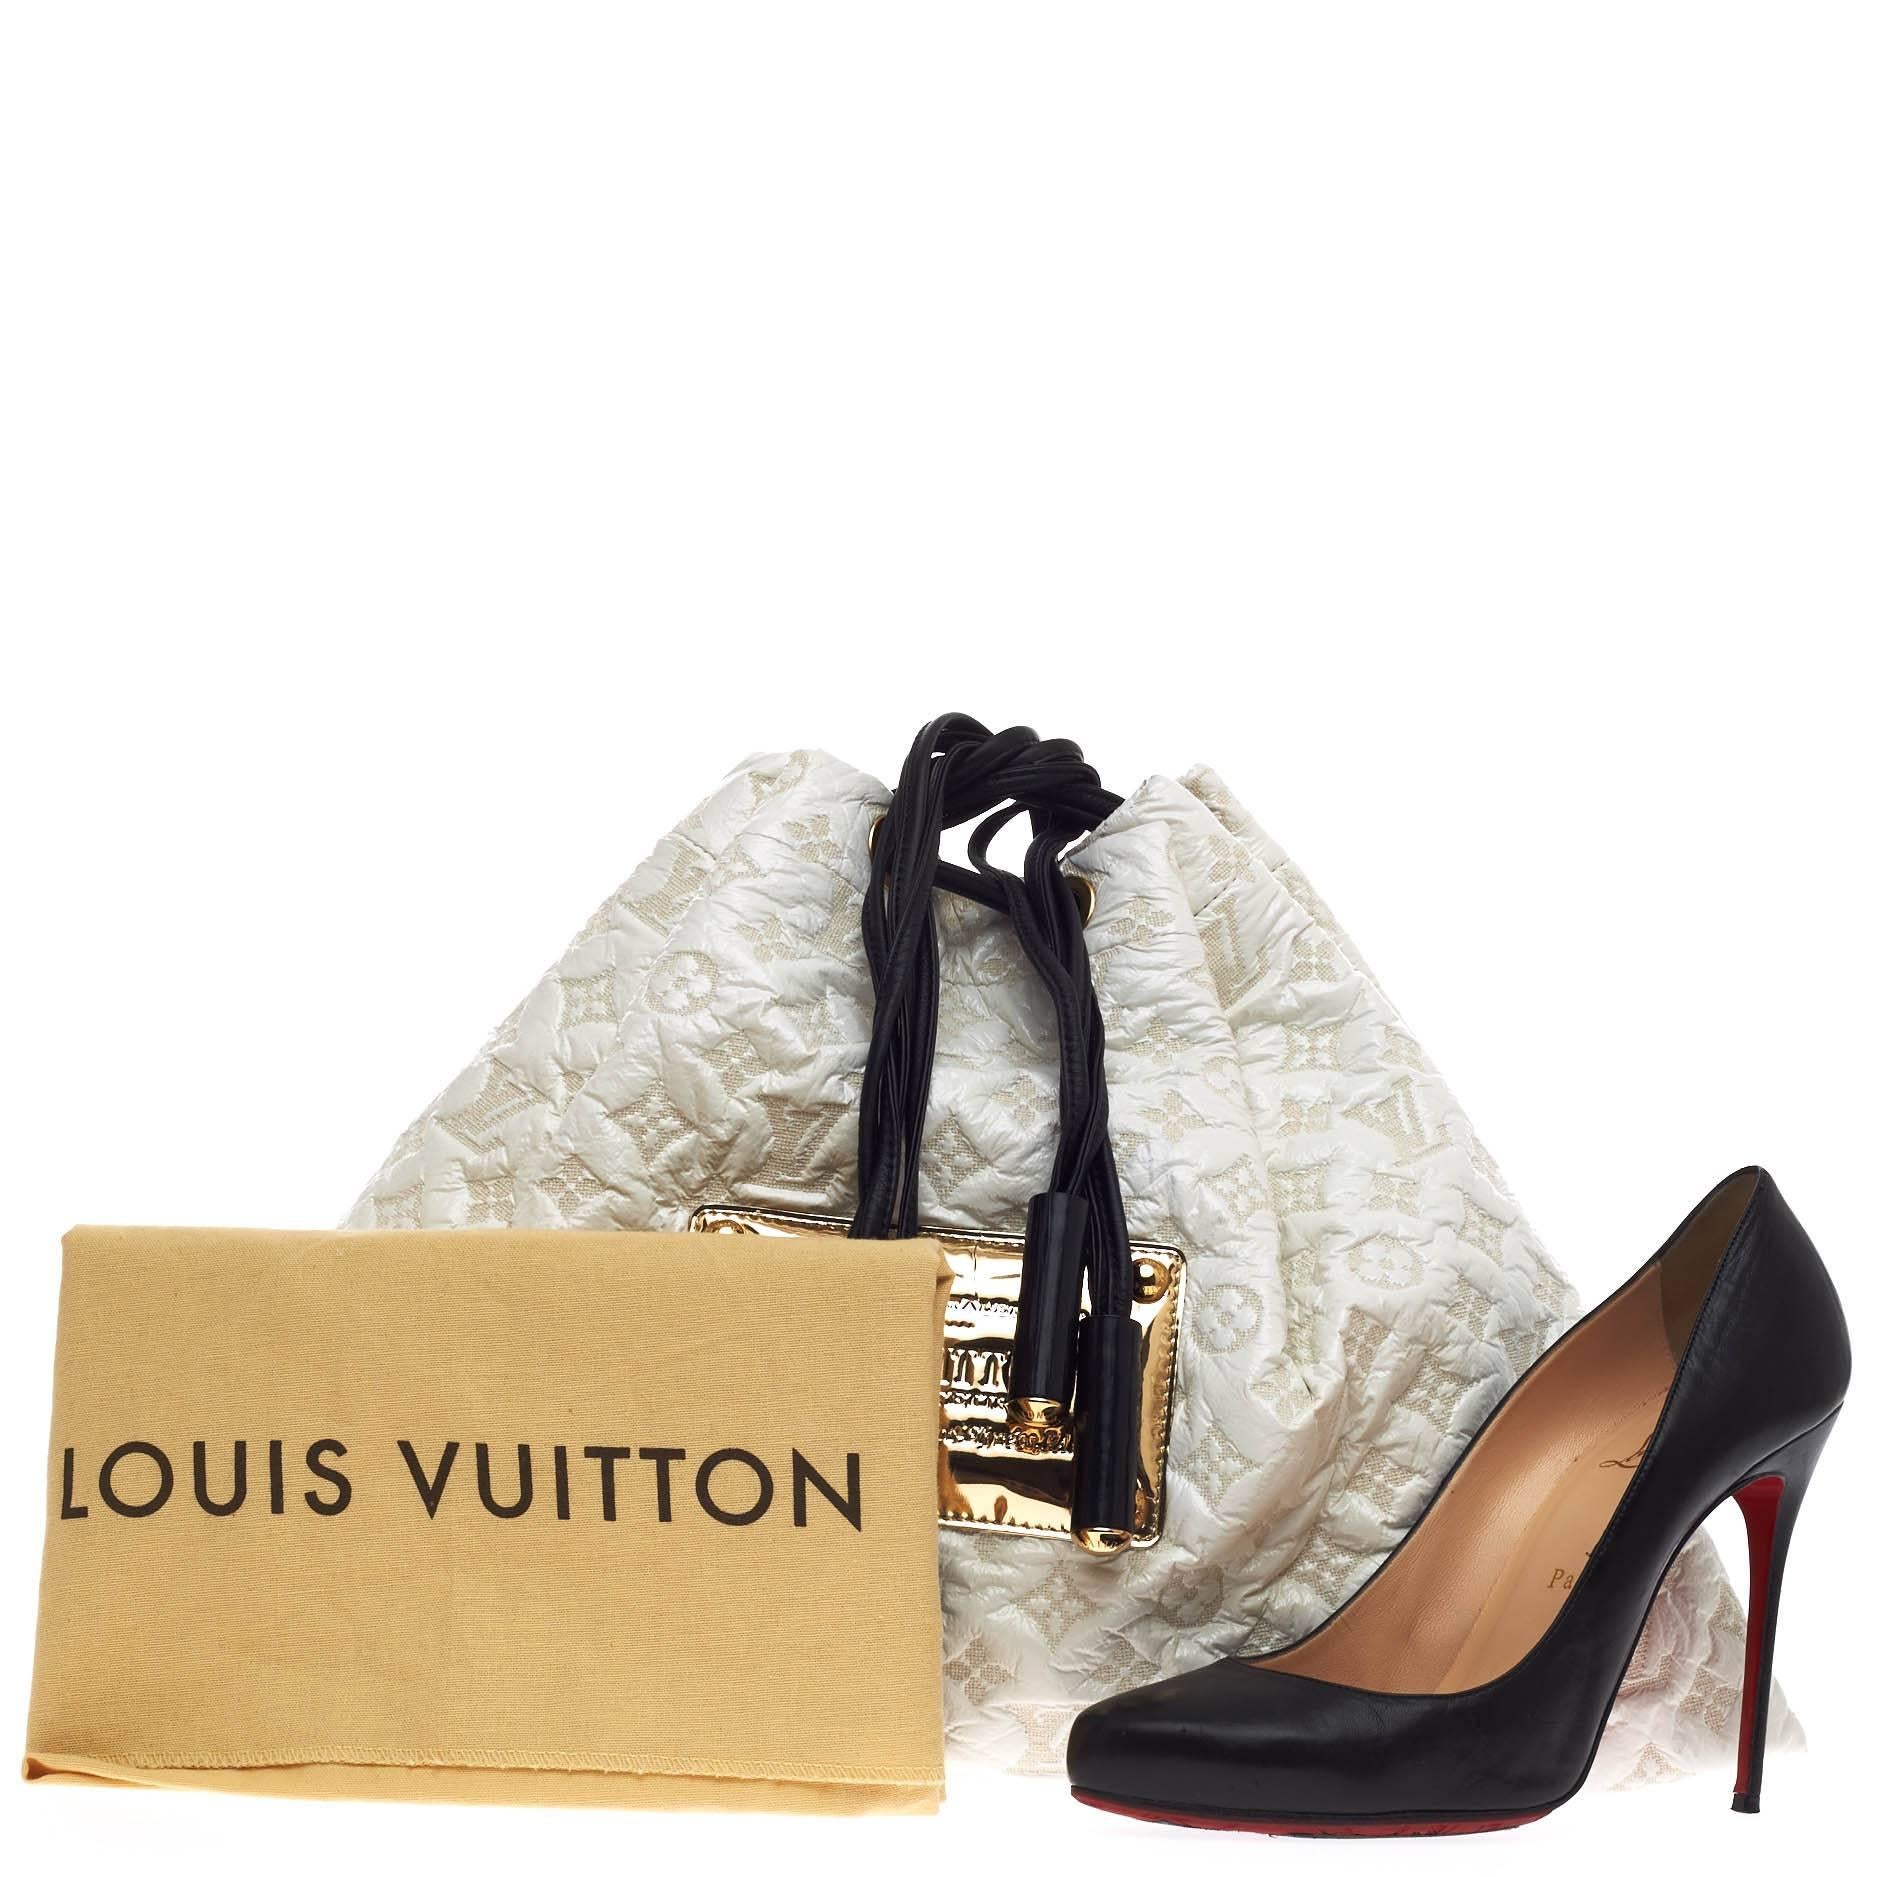 This authentic Louis Vuitton Squishy Tote Monogram Vinyl presented in the brand's Fall/Winter 2006 Inventeur Collection is for the stylish on-the-go woman. Crafted in durable white vinyl and lined canvas with an embossed monogram design, this